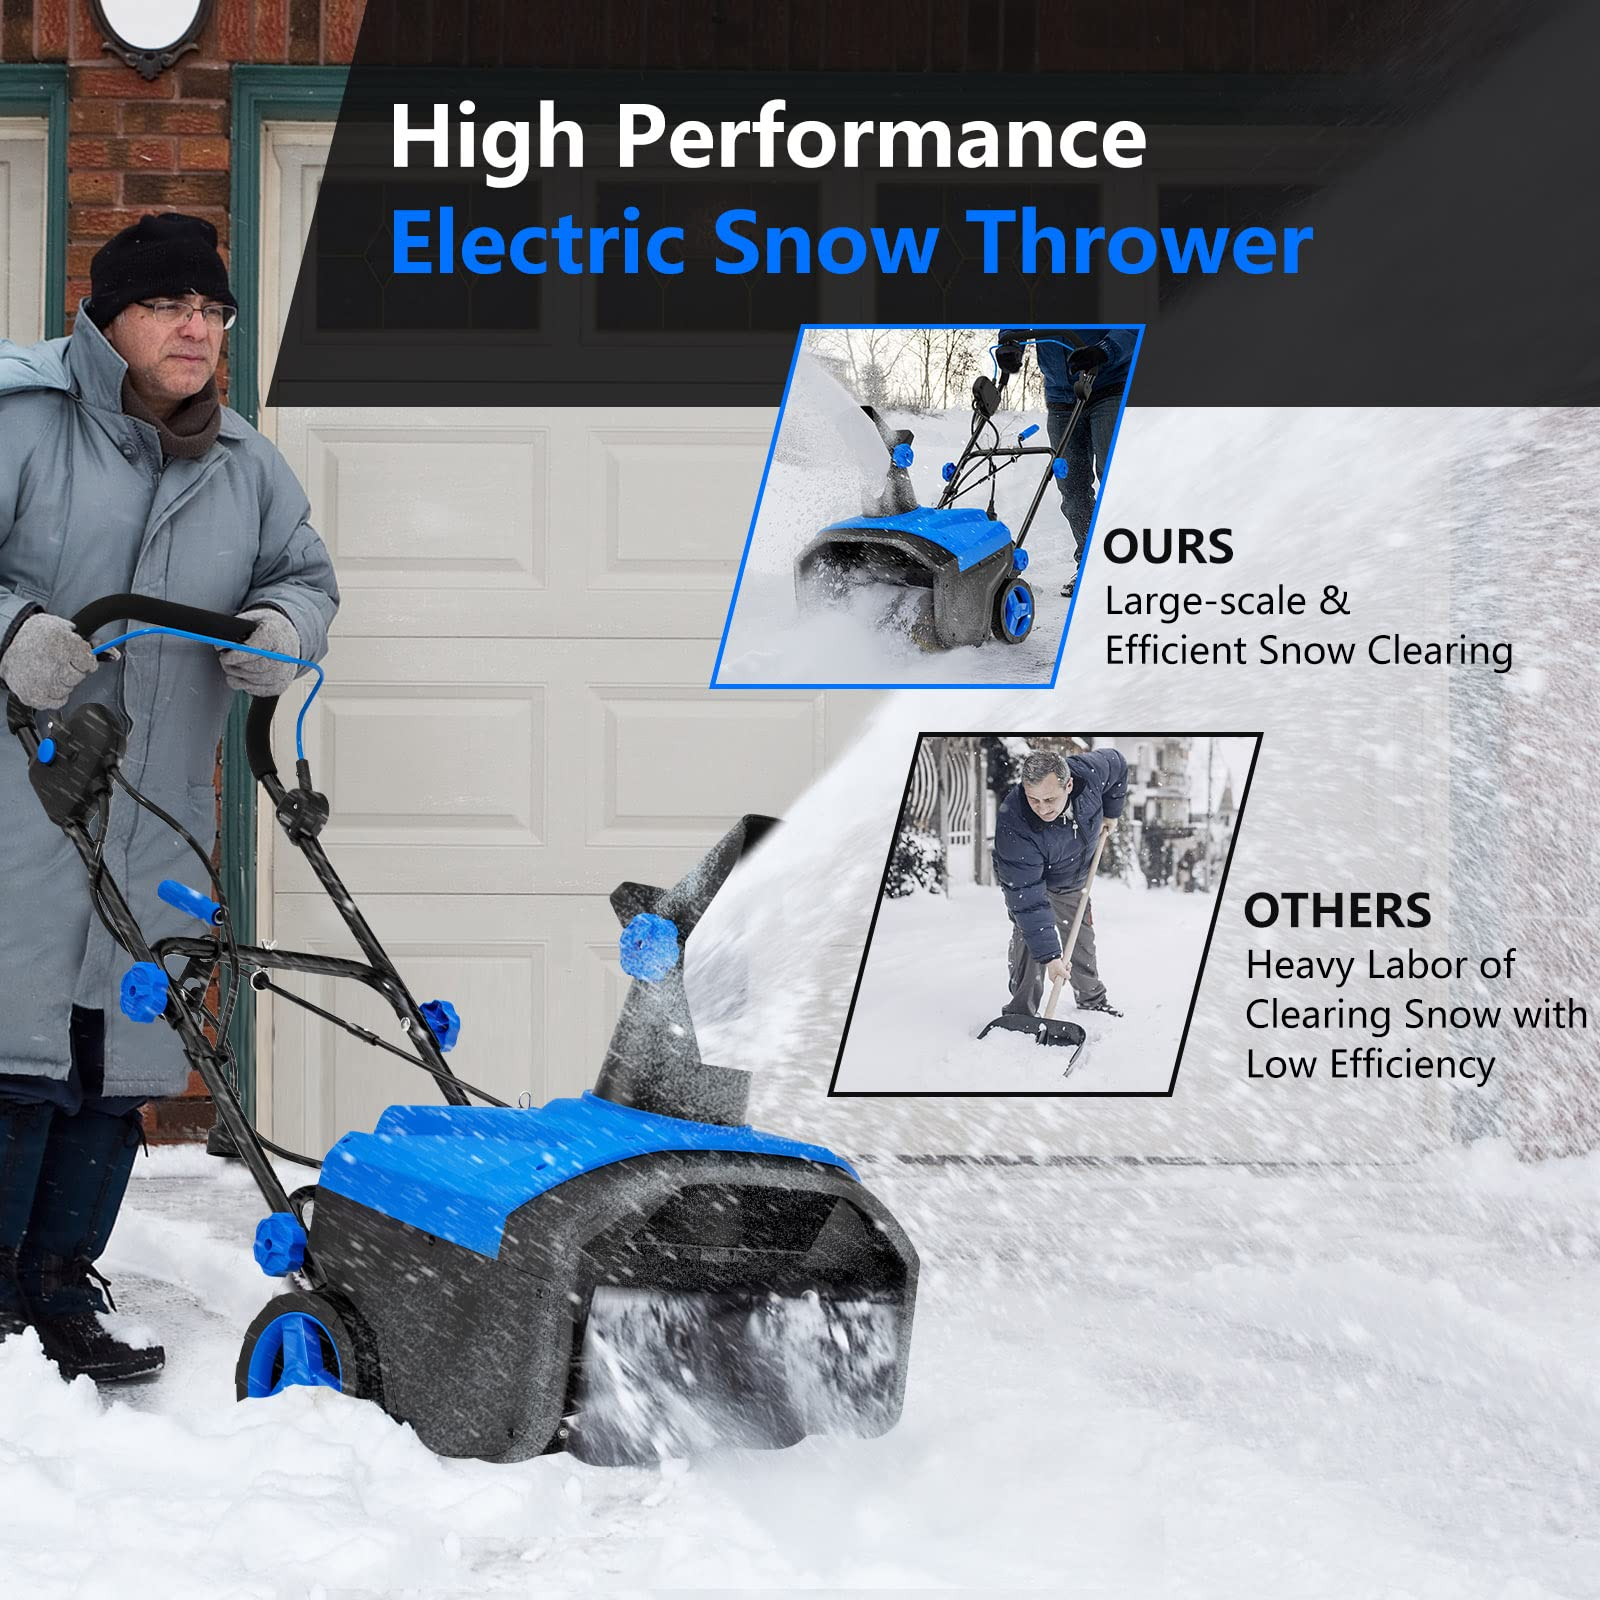 Goplus Snow Blower, 120V 15A Electric Snow Thrower with 180 Rotatable Chute & Folding Handle for Yard Driveway